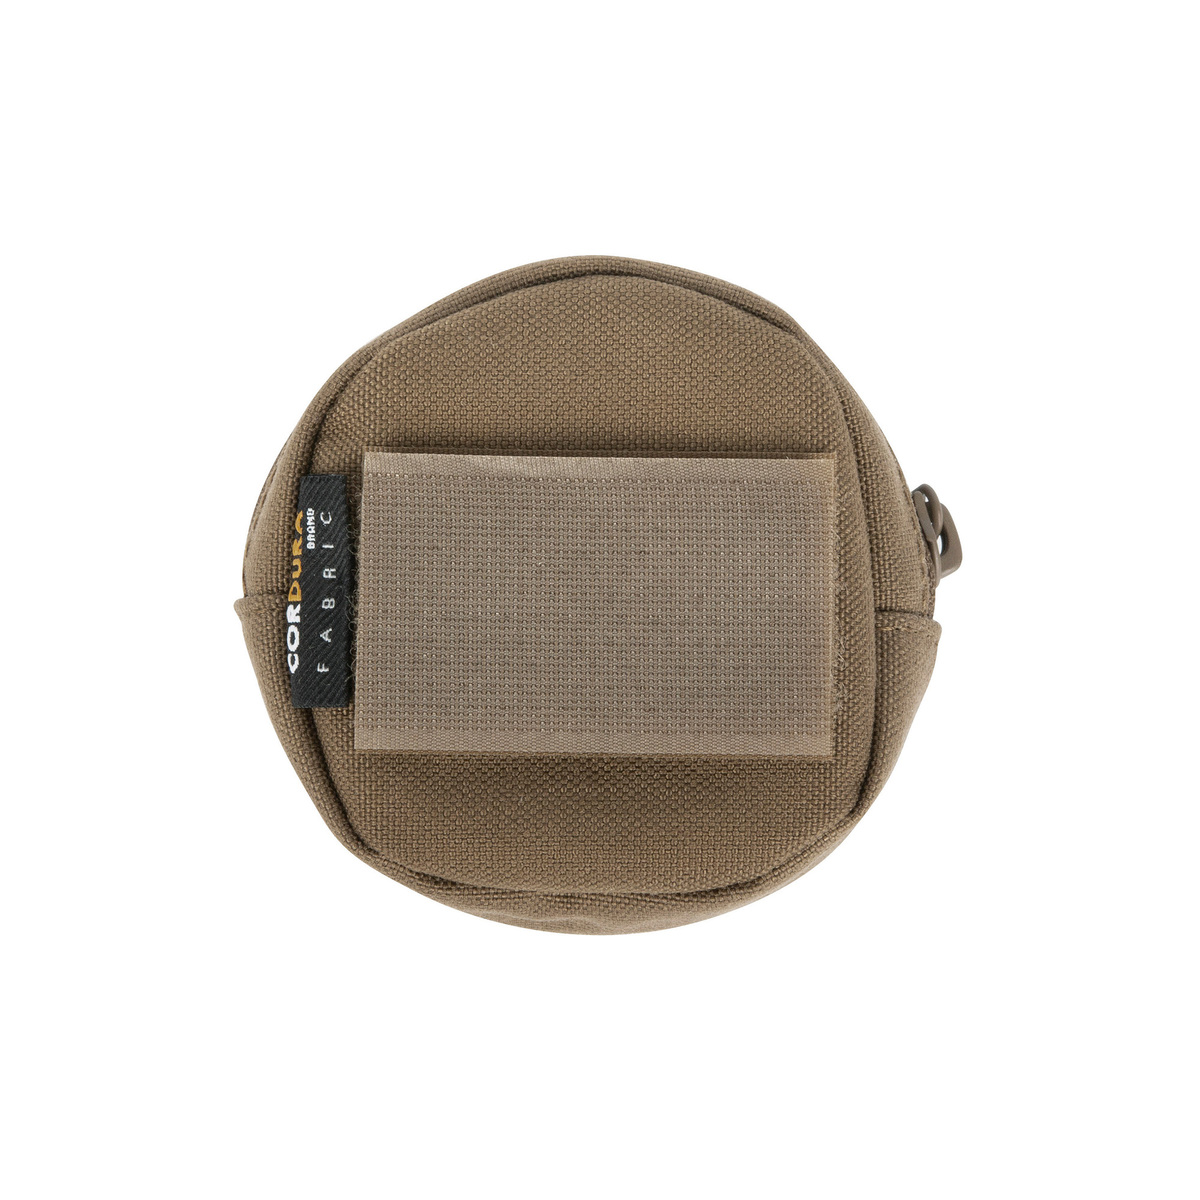 Tac Pouch Round VL Coyote brown